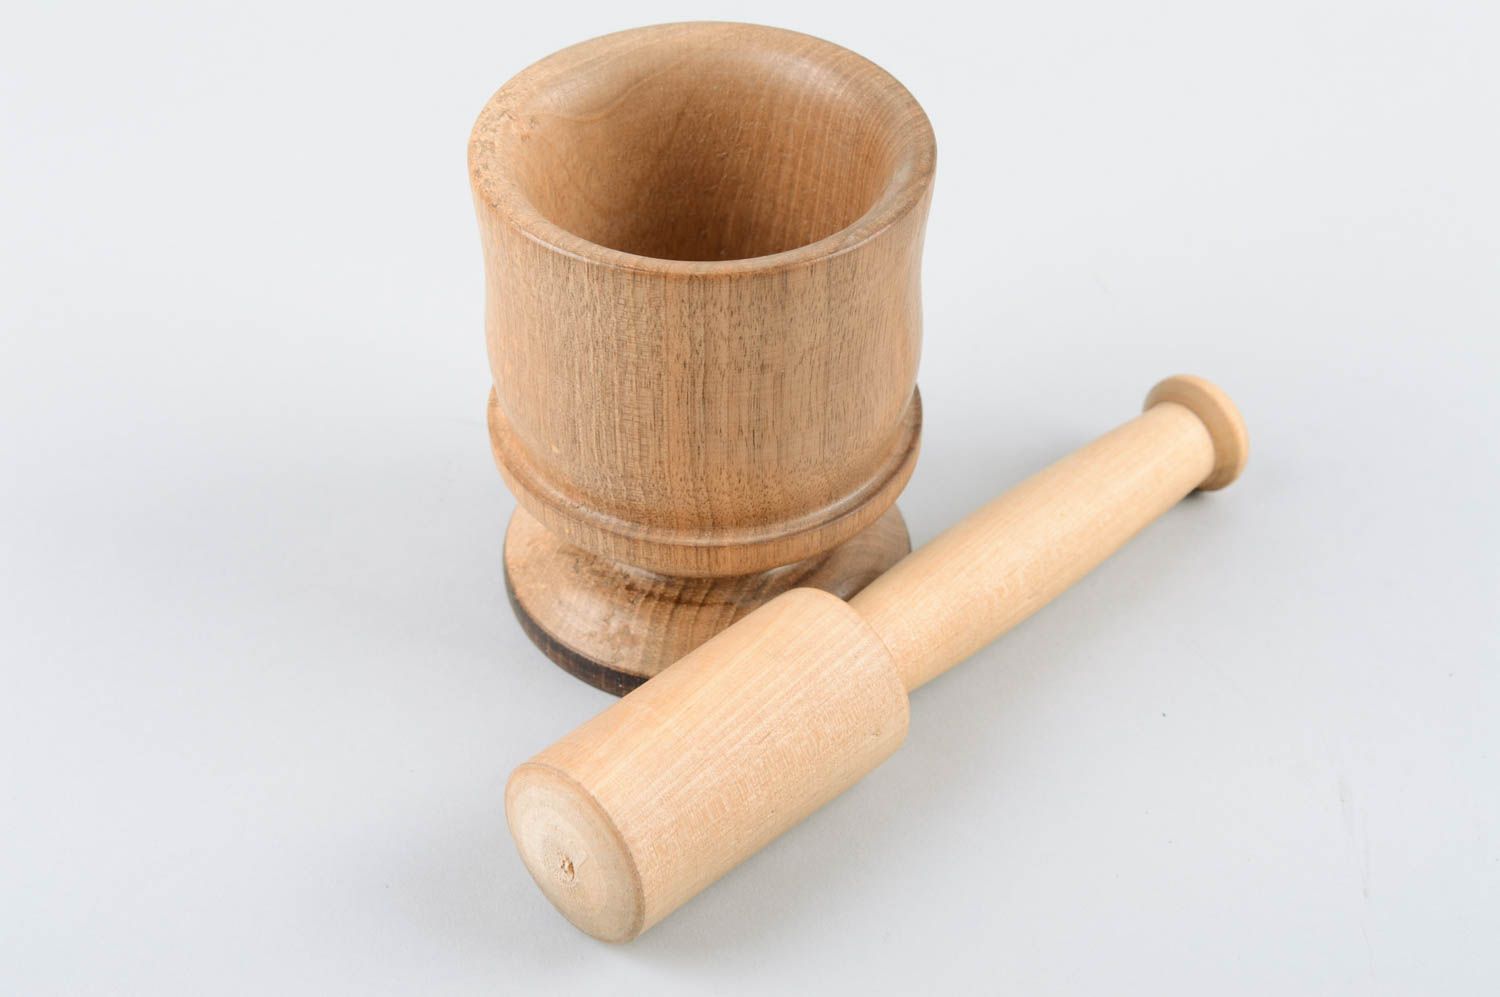 Handmade organic mortar and pestle wooden hand spice grinder wooden mortar photo 3